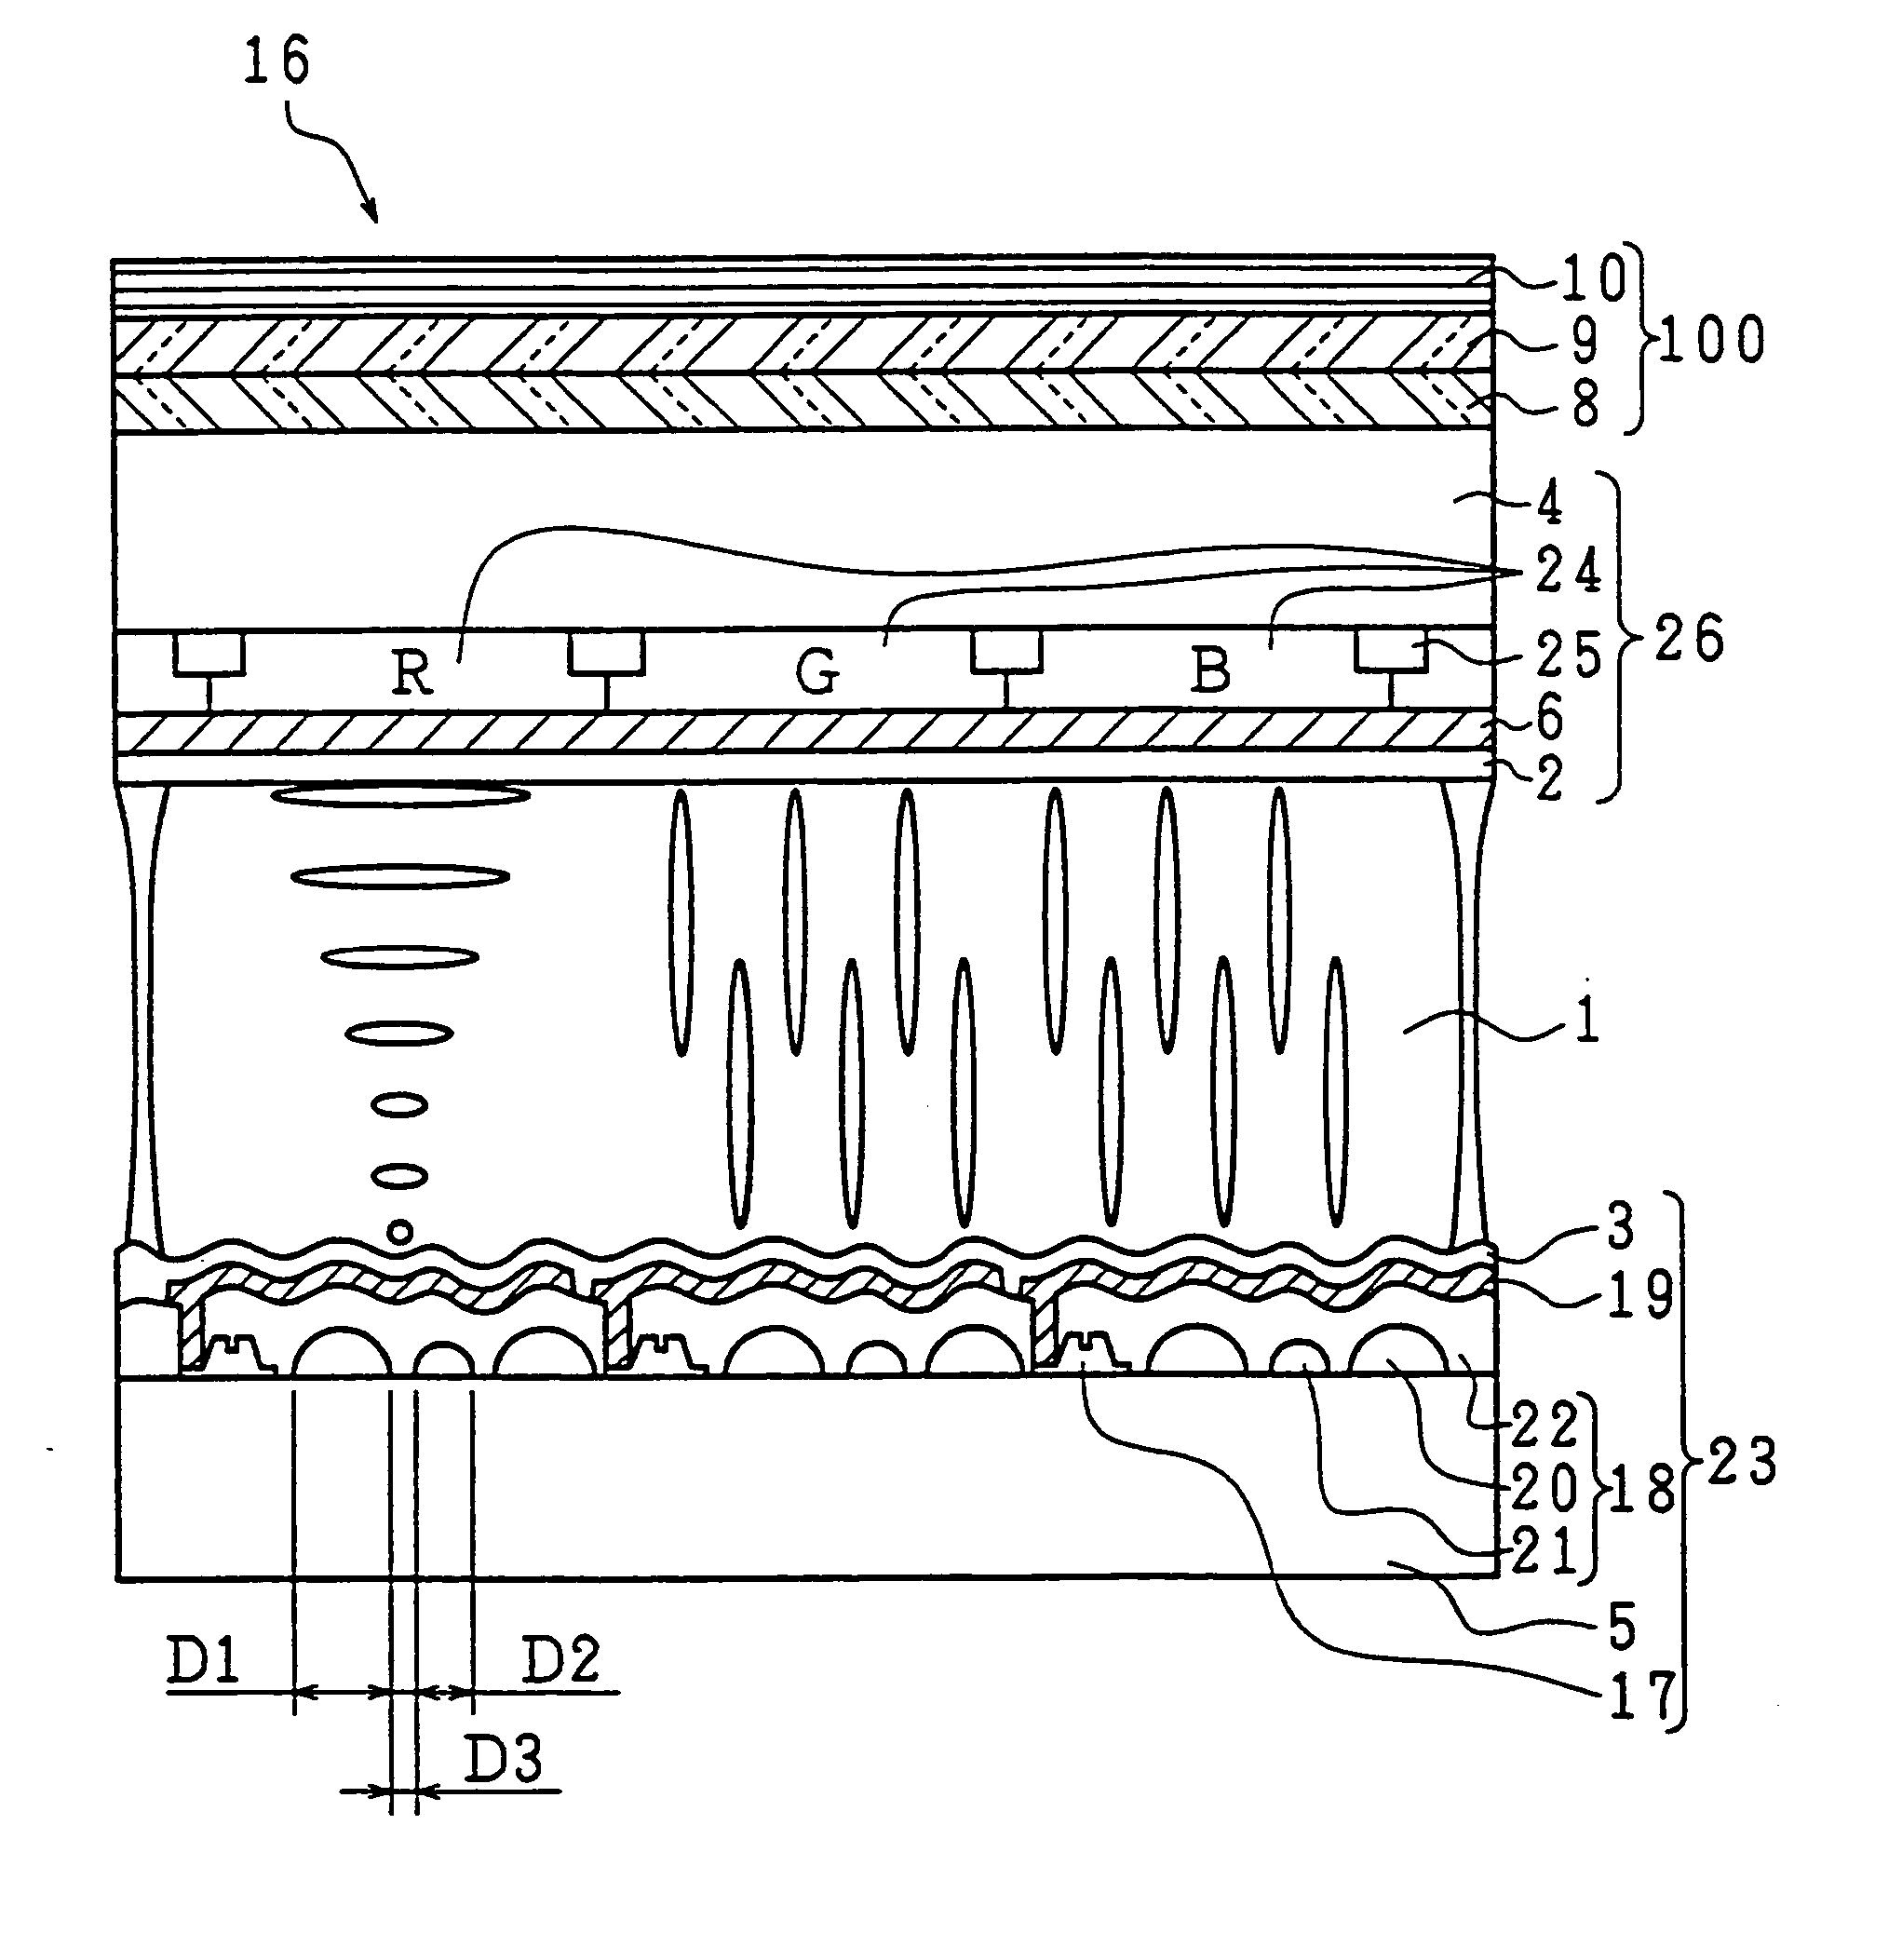 Reflective liquid crystal display device and reflective liquid crystal display device incorporating touch panel arranged therefrom